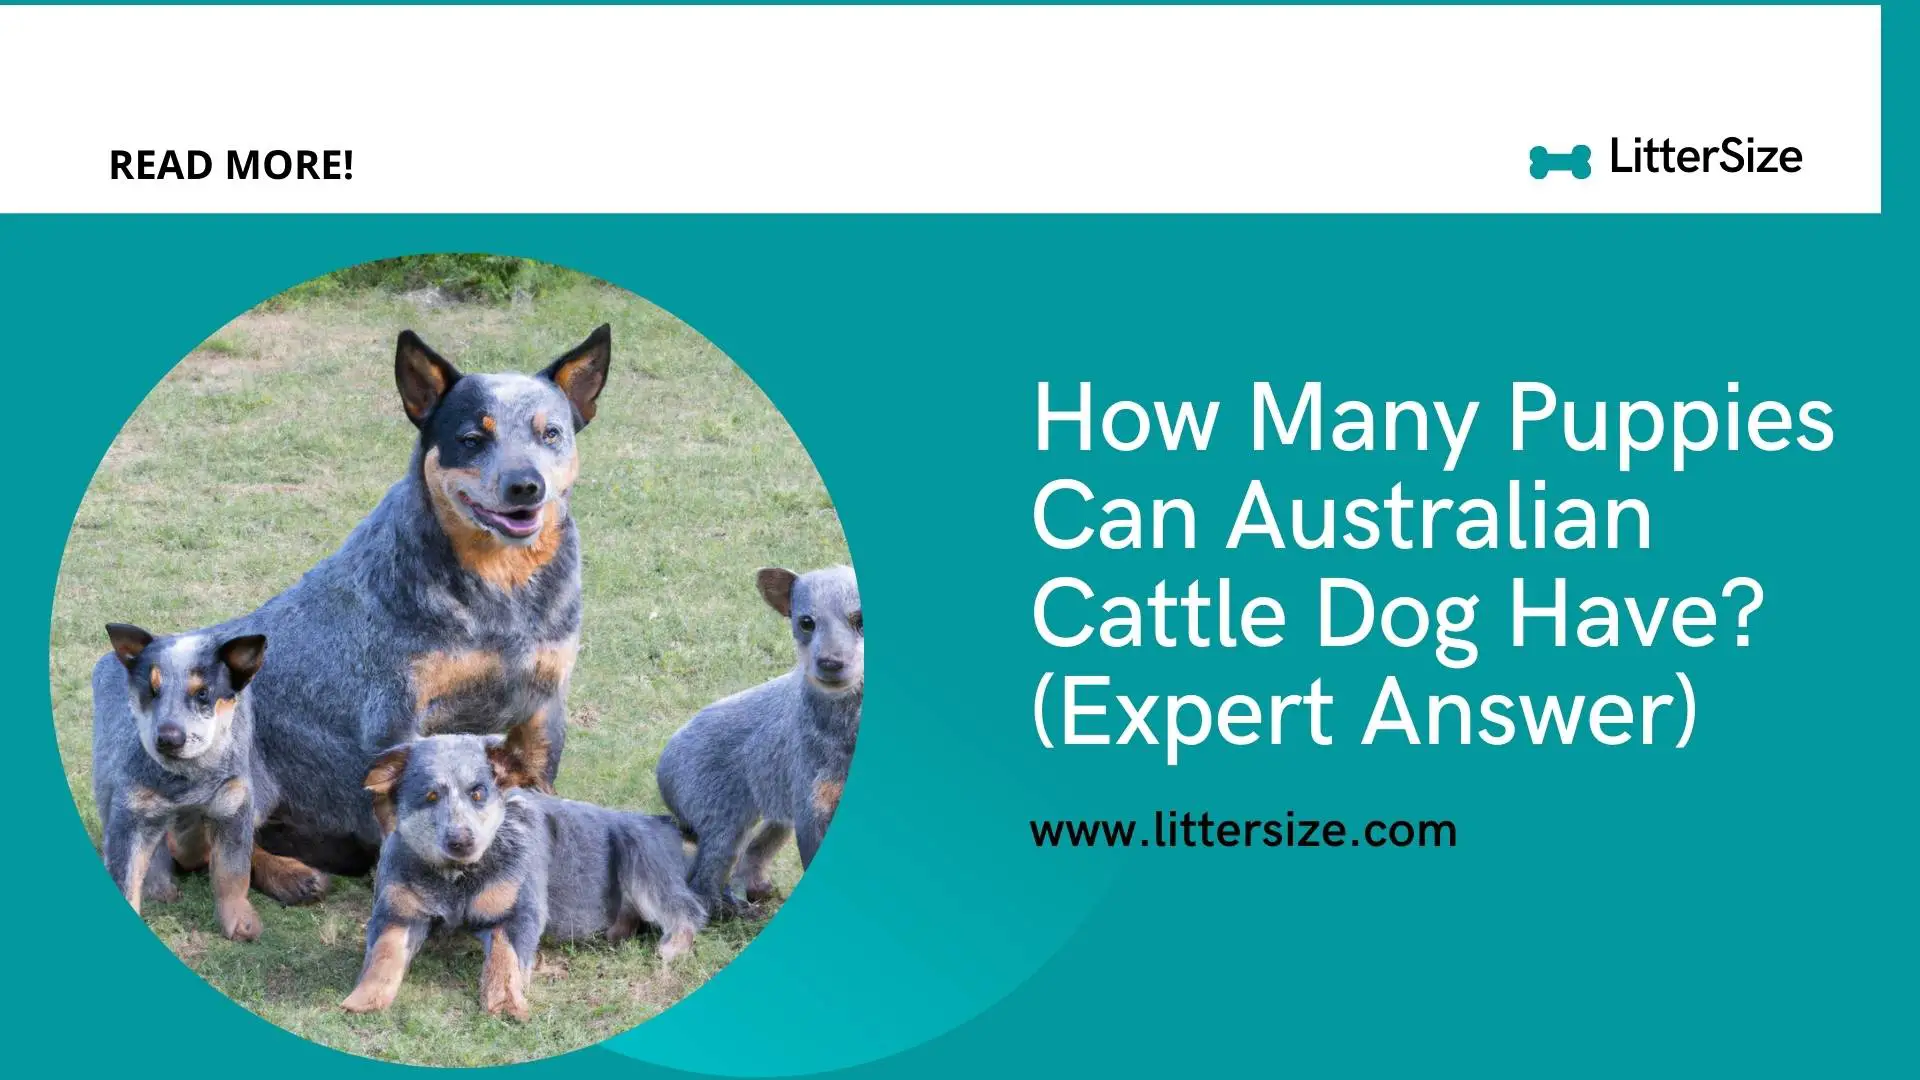 How Many Puppies Can Australian Cattle Dog Have? (Expert Answer)